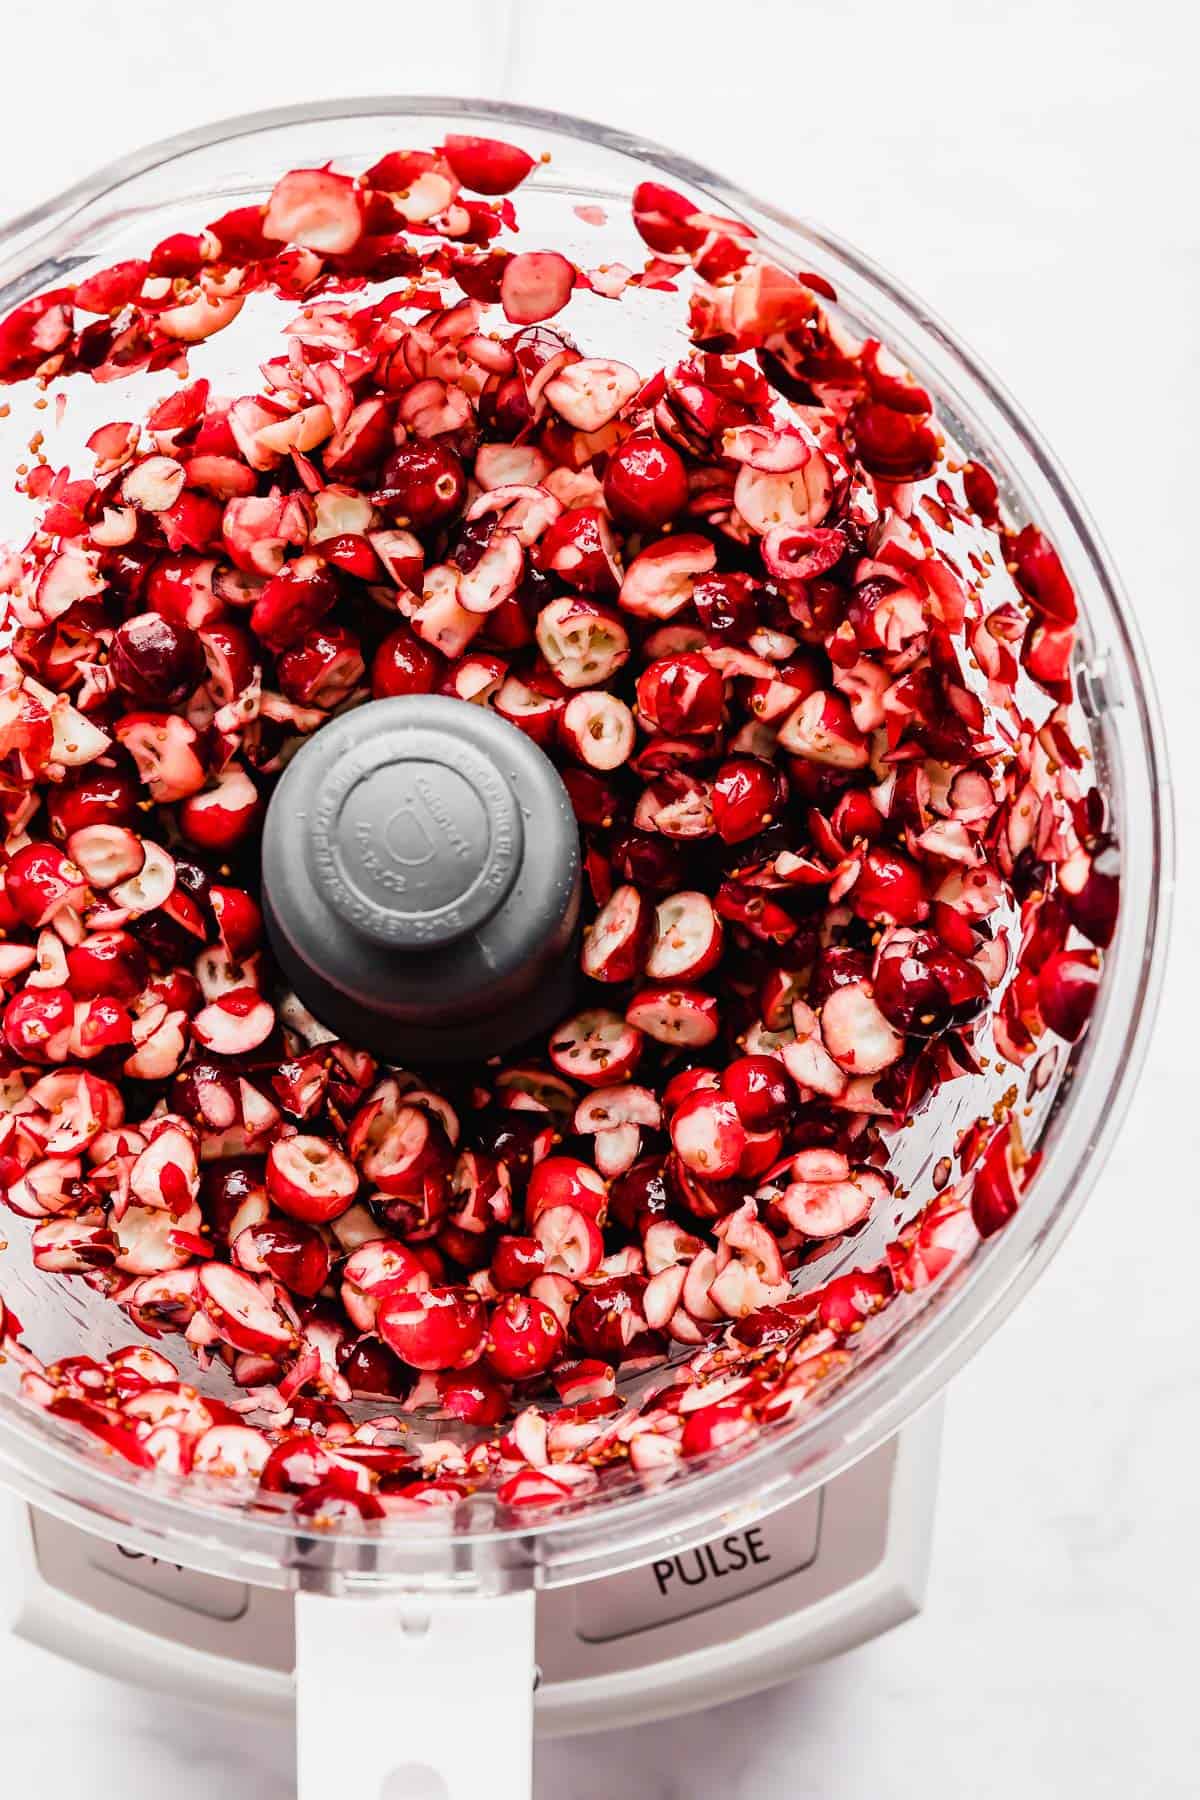 Chopped fresh red cranberries in a food processor for making cranberry salsa.